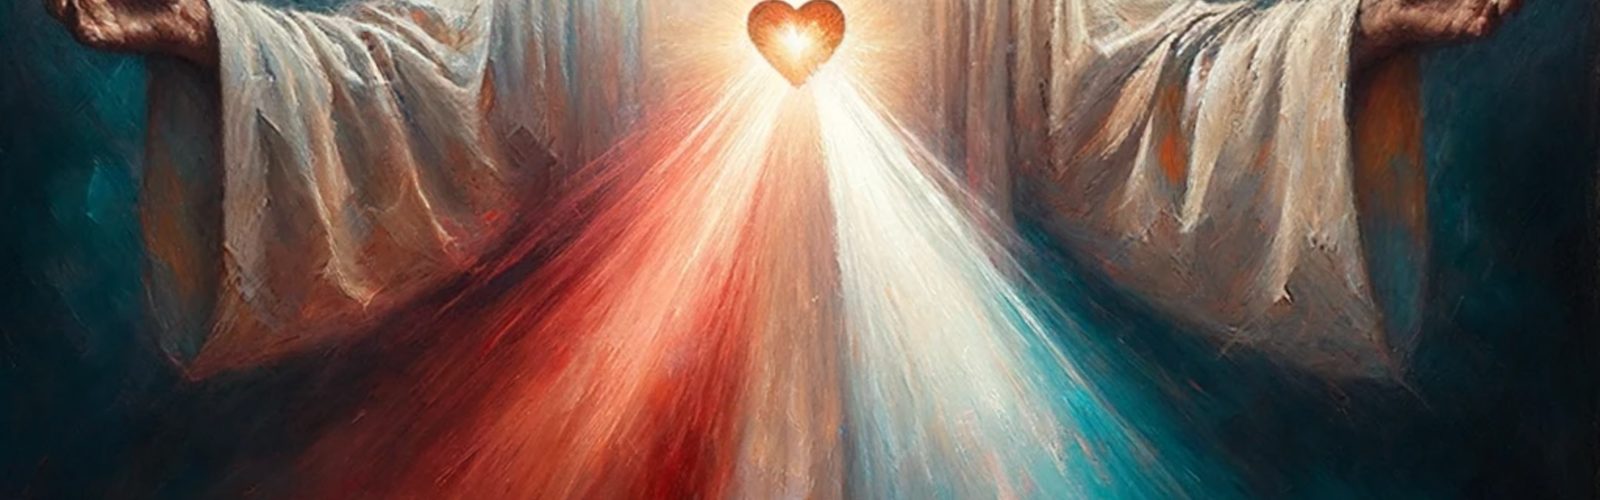 Jesus with rays of light coming from heart. Divine Mercy image.